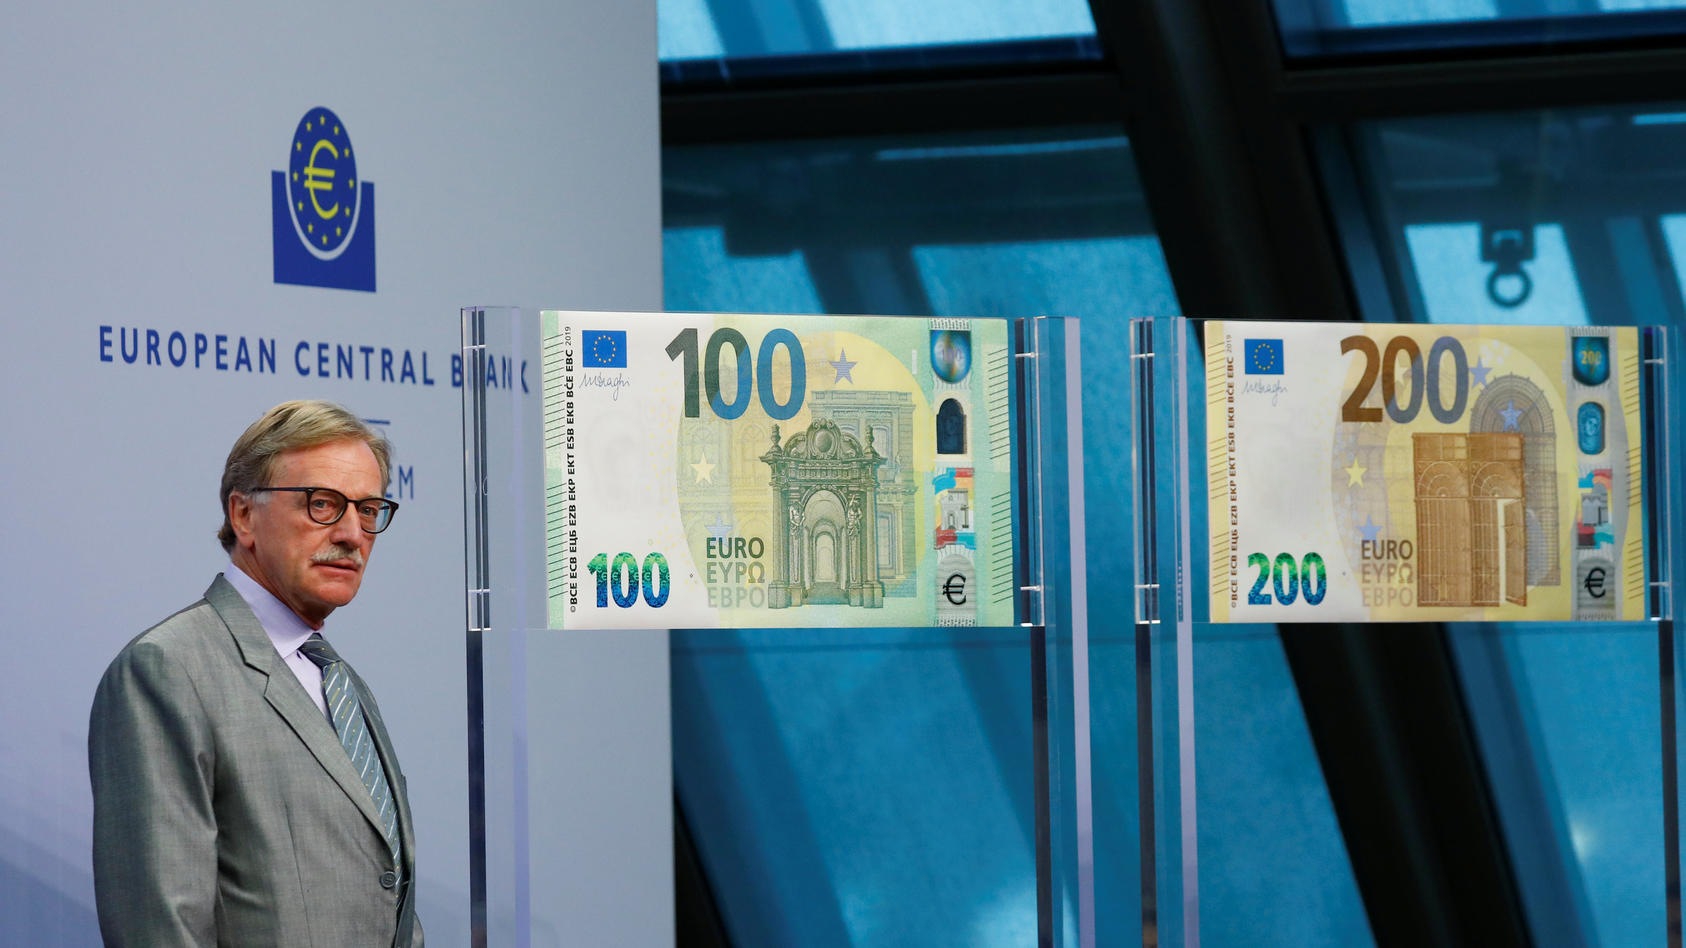 Yves Mersch, member of the Executive Board of the European Central Bank (ECB), presents the new 100- and 200-euro banknotes at the ECB.